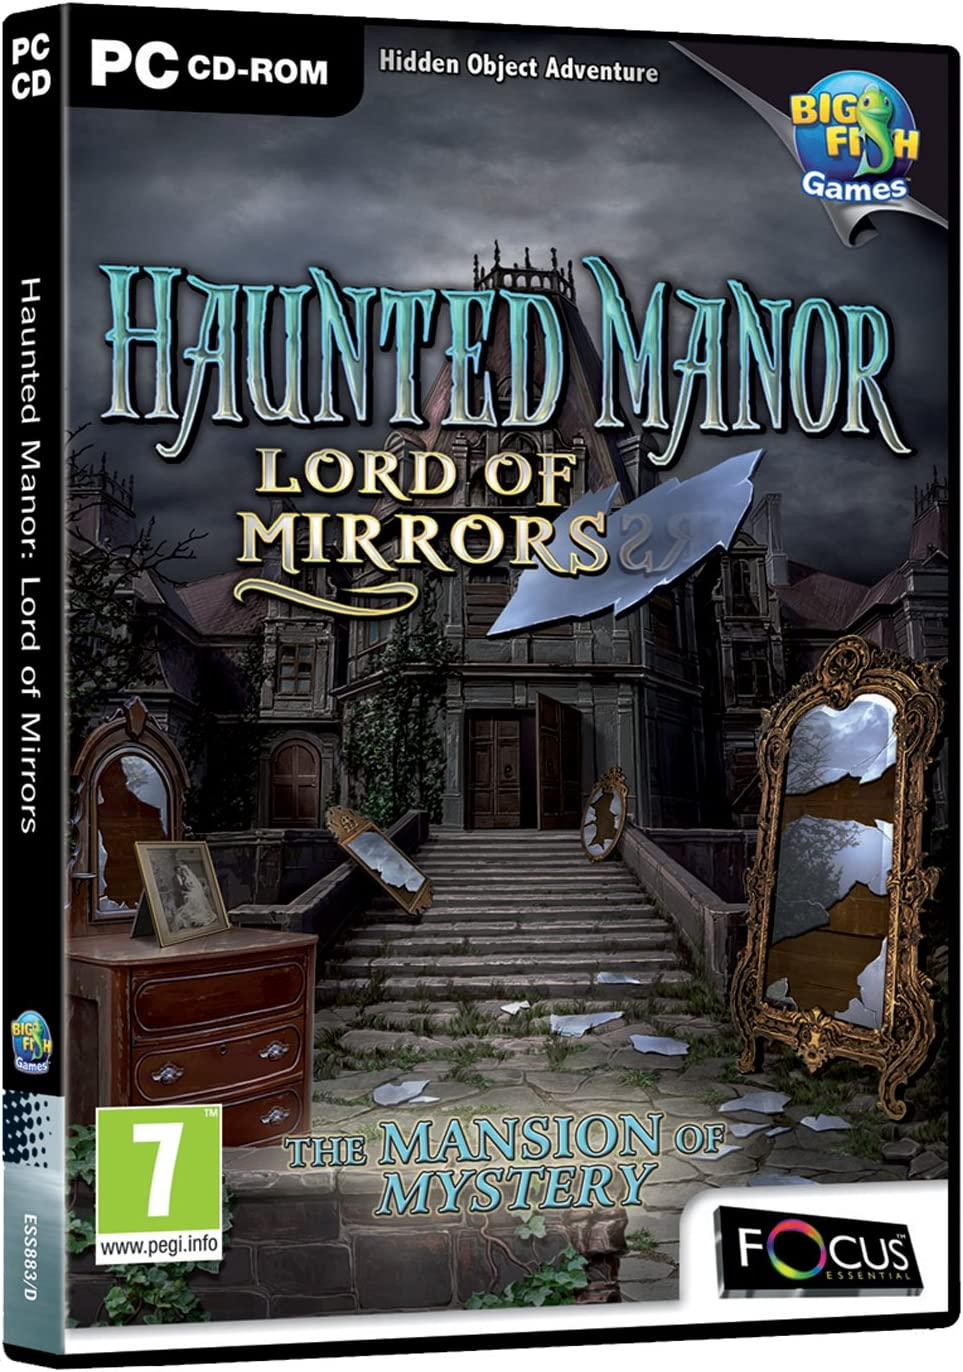 Haunted Manor: Lord of Mirrors (PC-CD)